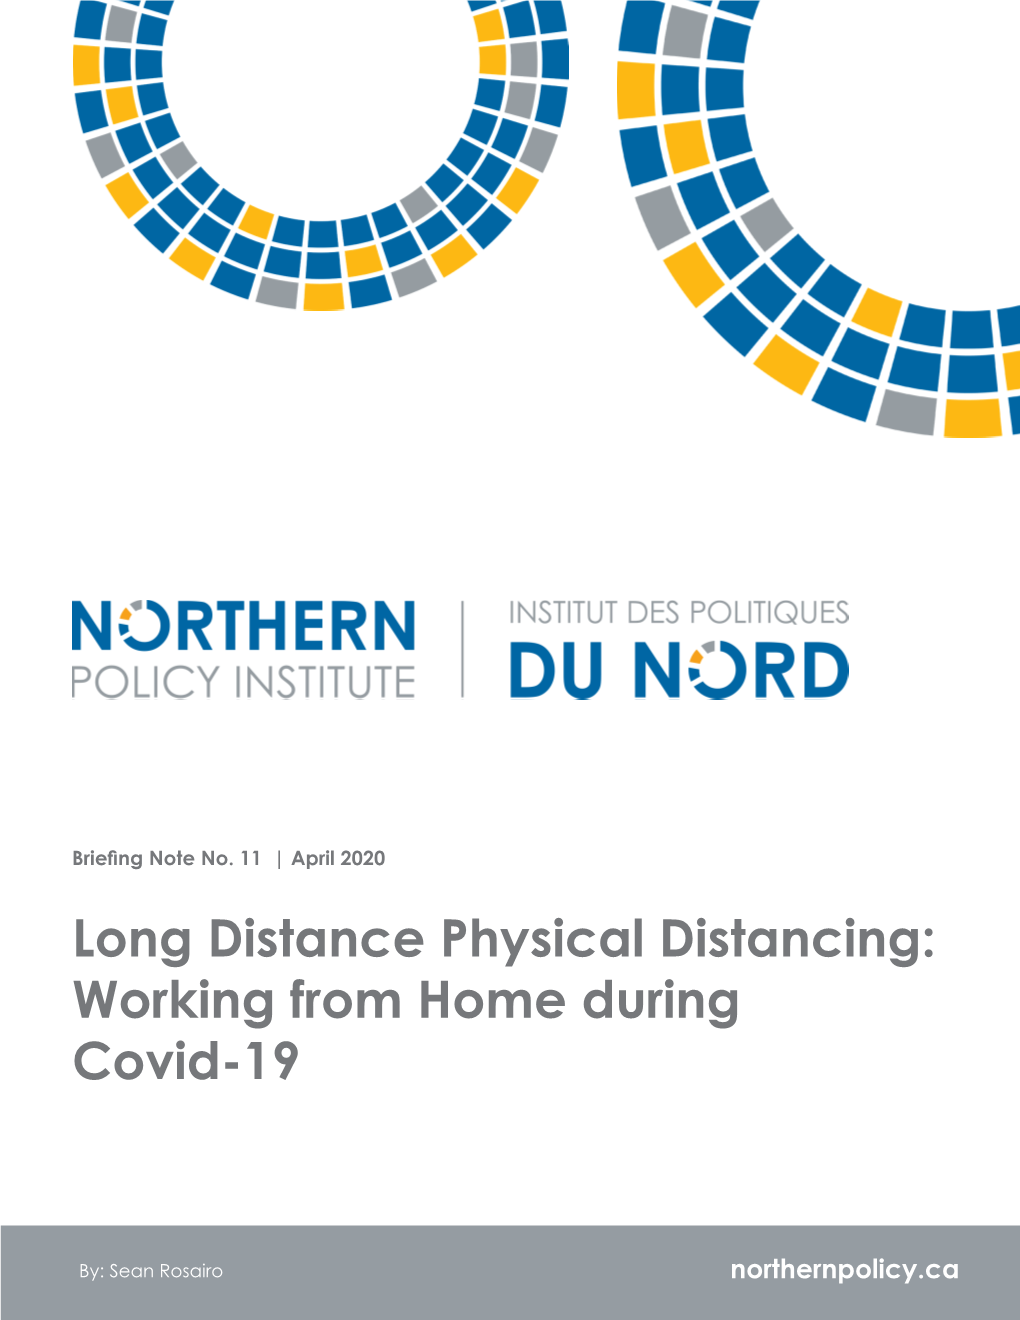 Long Distance Physical Distancing: Working from Home During Covid-19